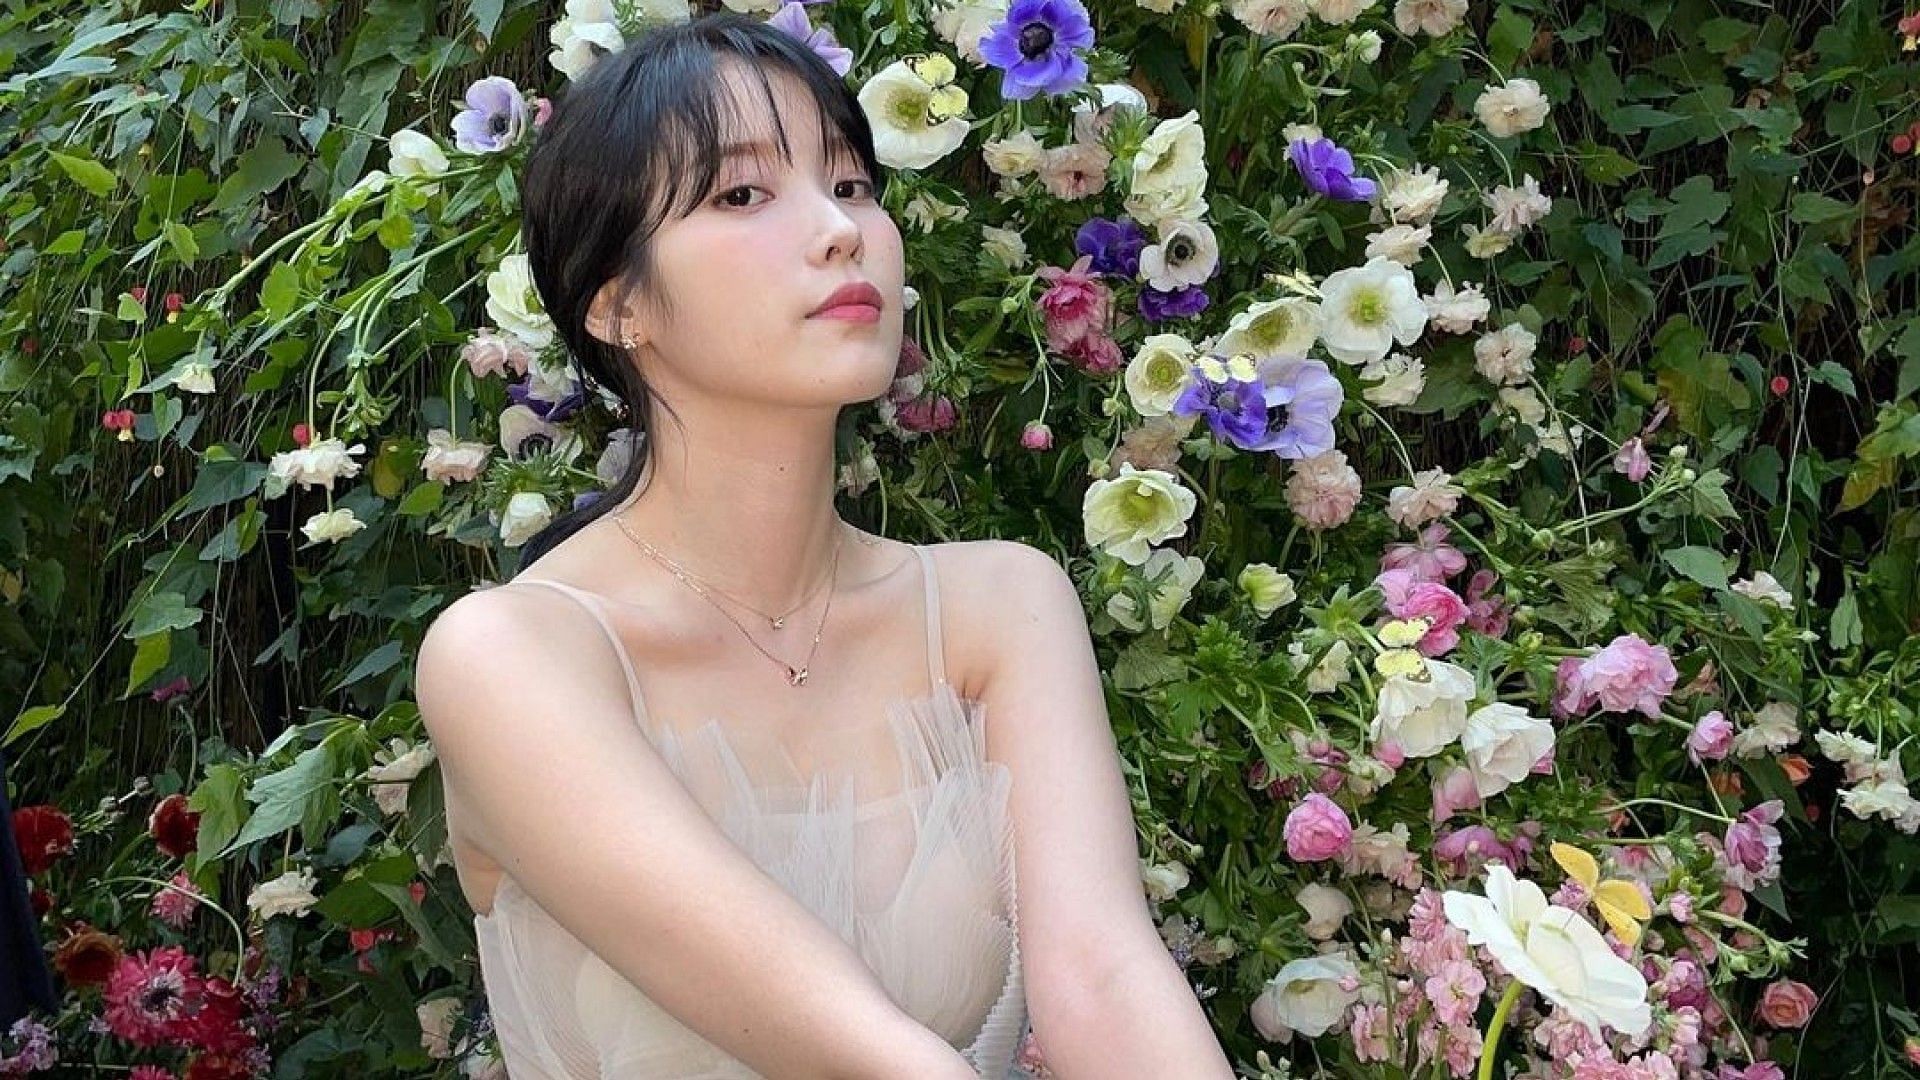 K-pop singer and actress IU wants to be limitless as a musician and actor (Image via dlwlrma/Instagram)